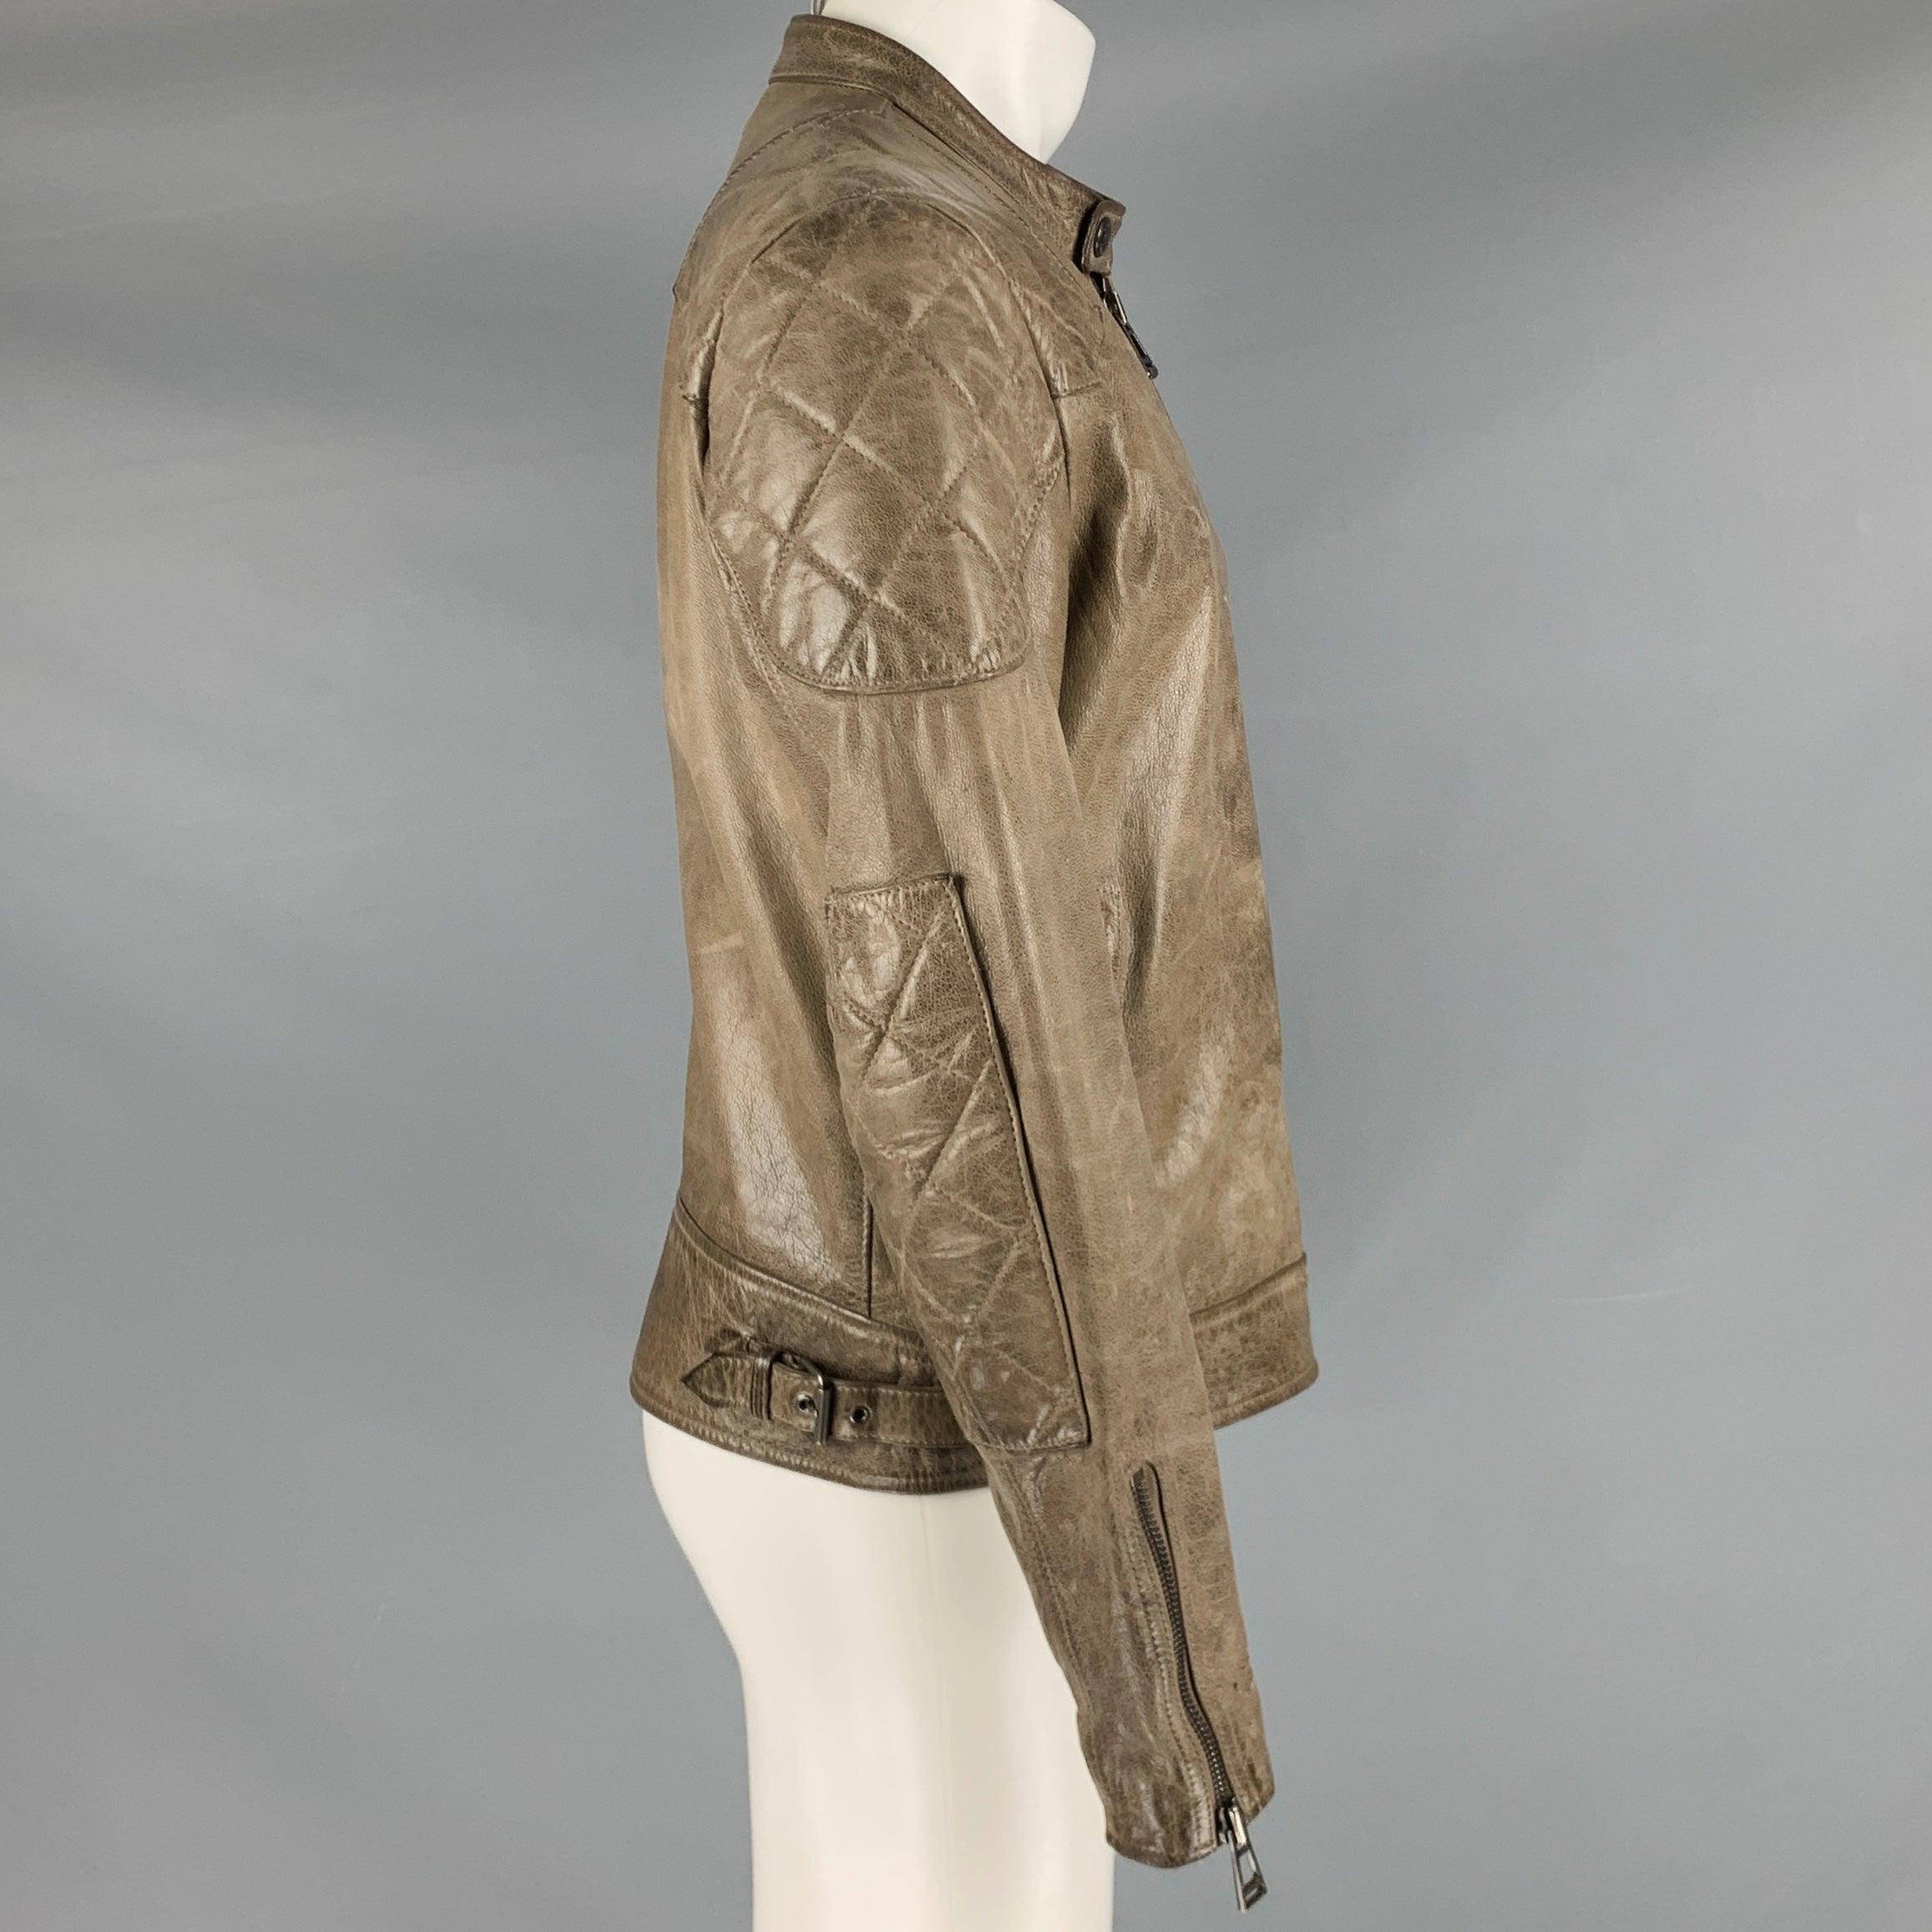 BELSTAFF jacket
in a grey taupe leather fabric featuring a motorcycle style, quilted shoulders, zip pockets, and zip up closure.
Made in Italy.Very Good Pre-Owned Condition. Moderate signs of wear. 

Marked:   IT 50 

Measurements: 
 
Shoulder: 17.5